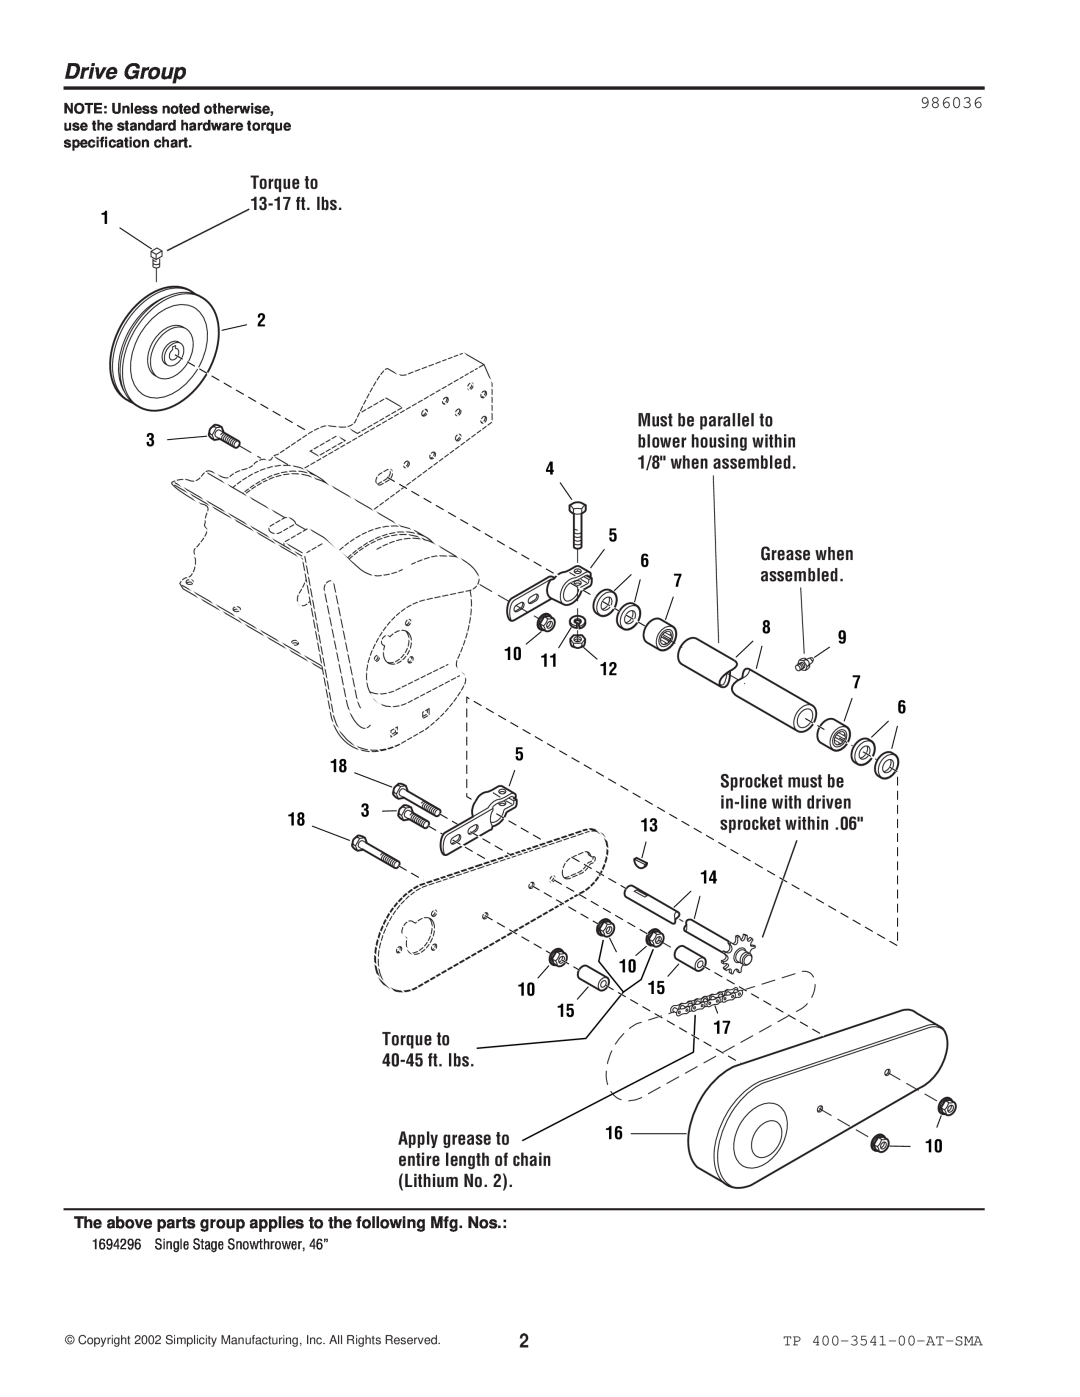 Simplicity 1694296 Drive Group, 986036, Torque to 13-17 ft. lbs, Must be parallel to, blower housing within, assembled 